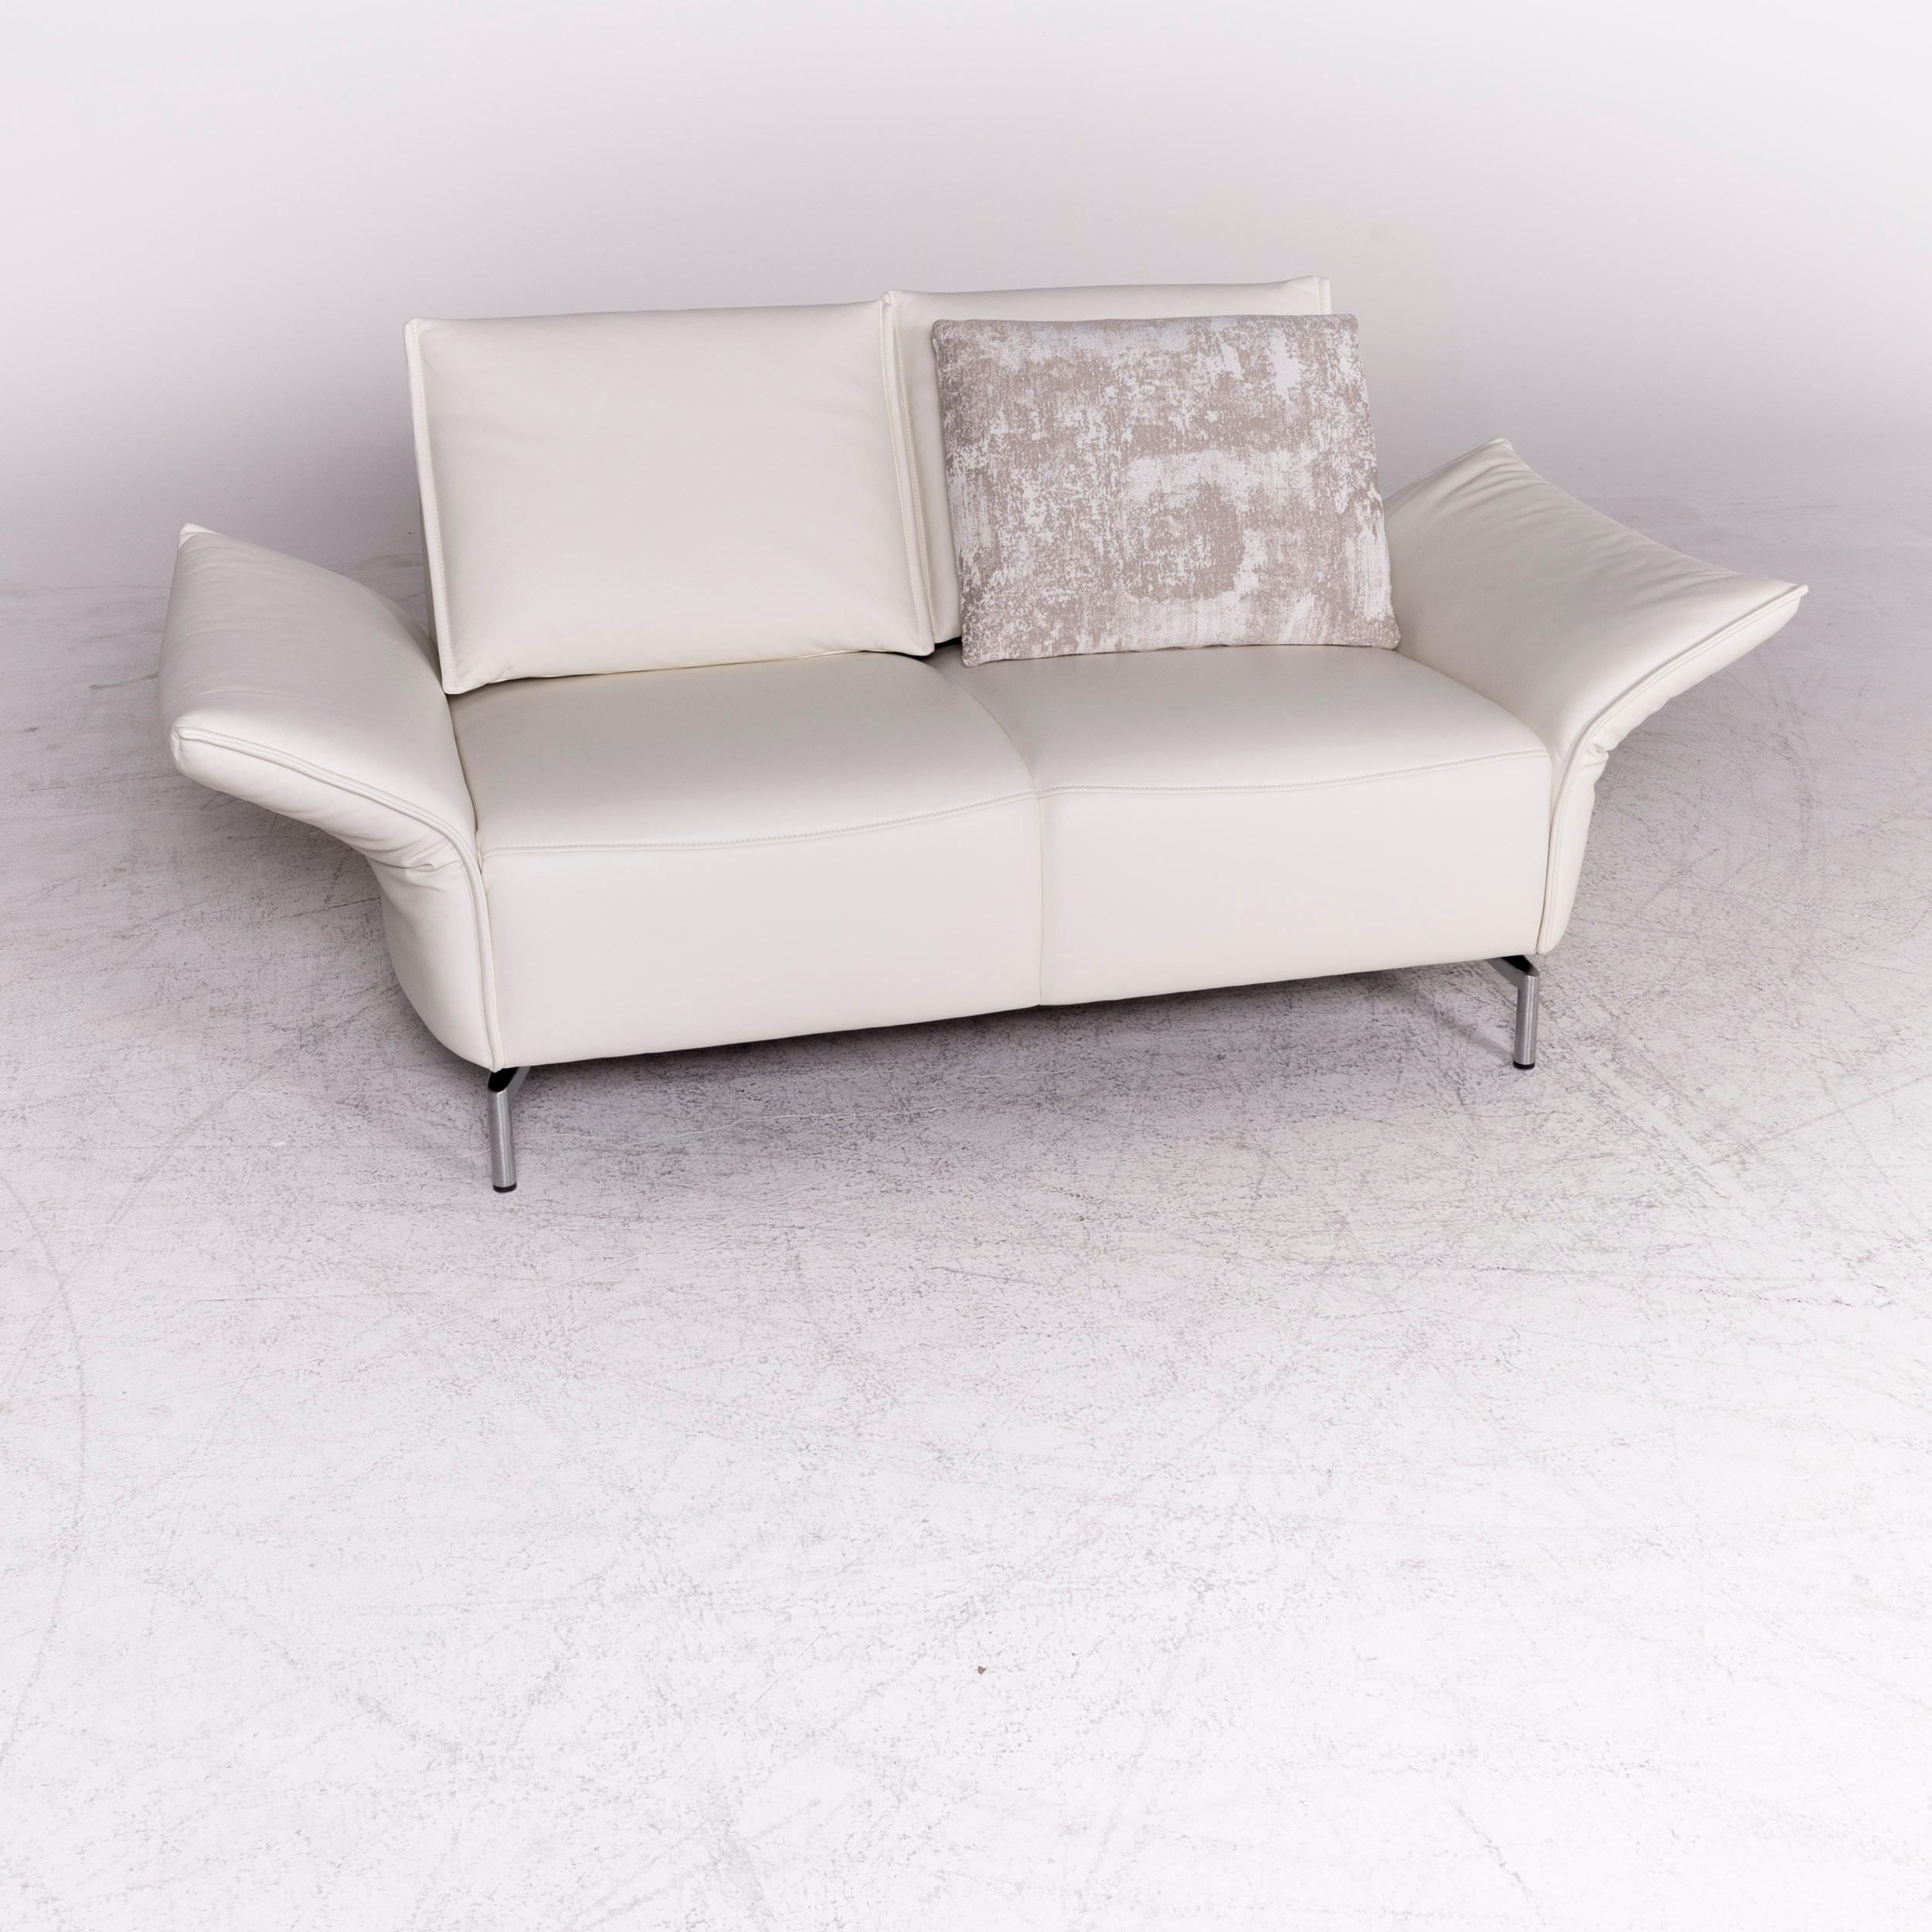 We bring to you a Koinor Vanda designer leather sofa white real leather two-seat couch.
 

Product measures in centimeters:

Depth: 86
Width: 157
Height: 82
Seat-height: 44
Rest-height: 54
Seat-depth: 49
Seat-width: 120
Back-height: